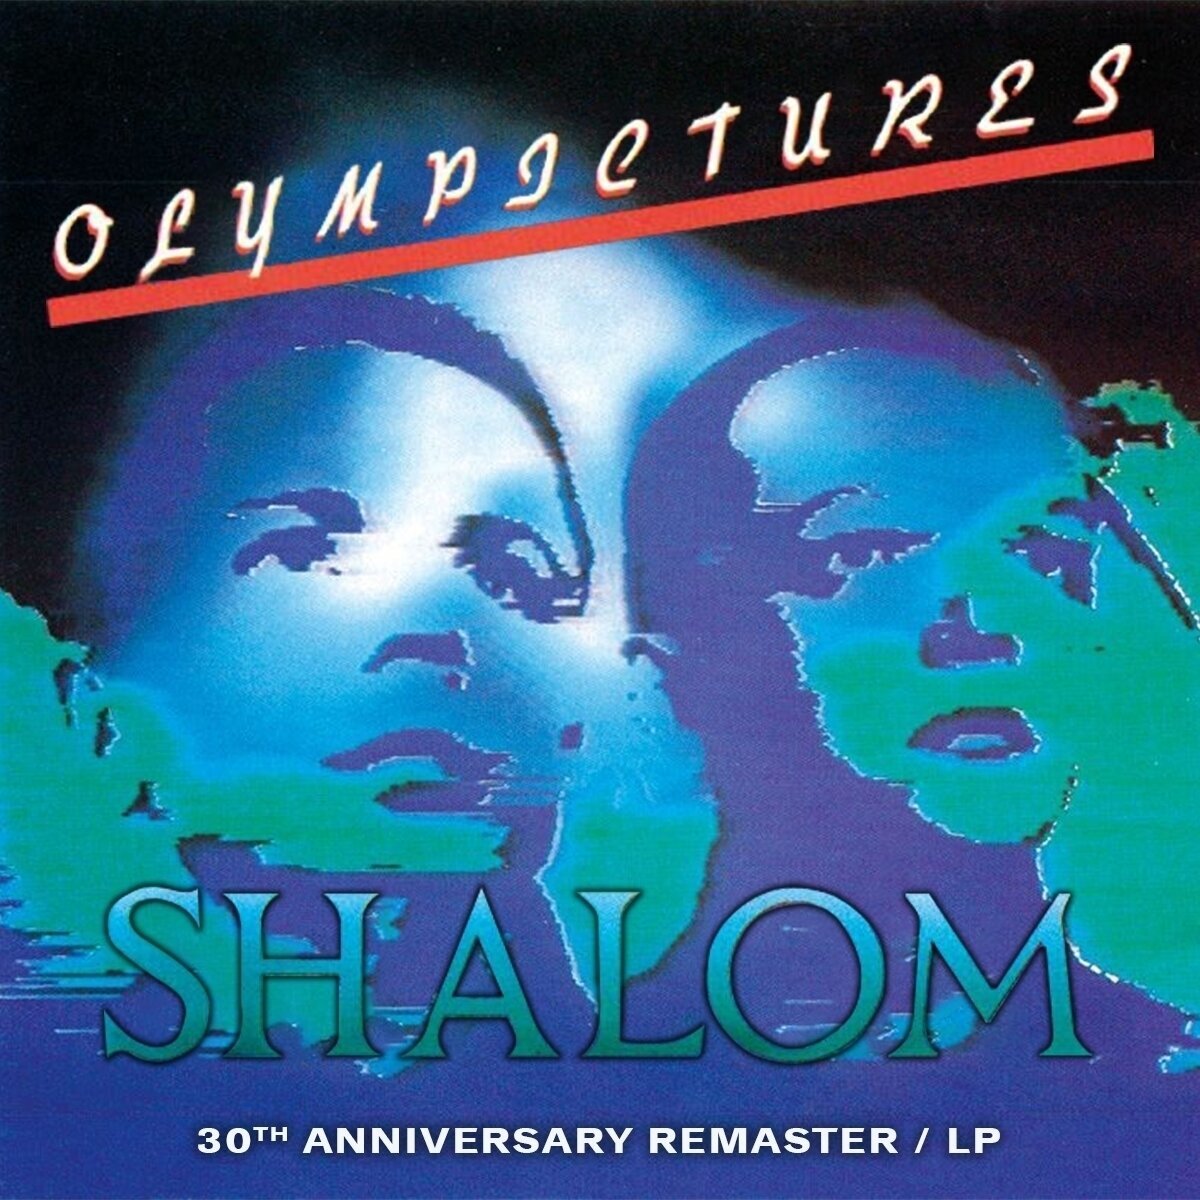 Music CD Shalom - Olympictures (30th Anniversary) (Remastered) (CD)